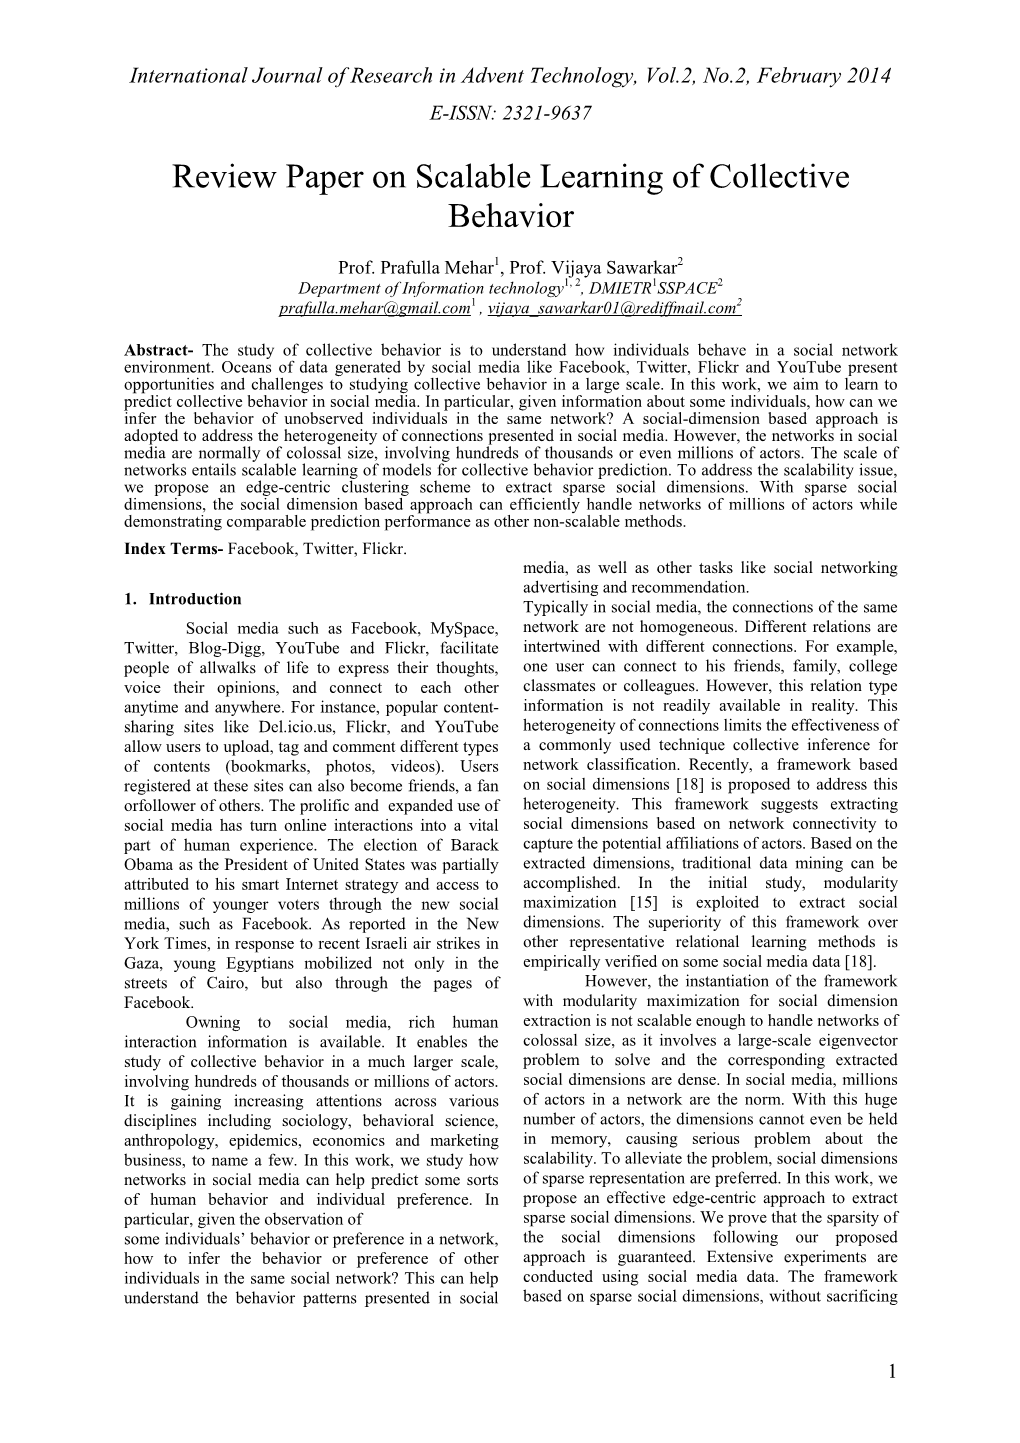 Review Paper on Scalable Learning of Collective Behavior